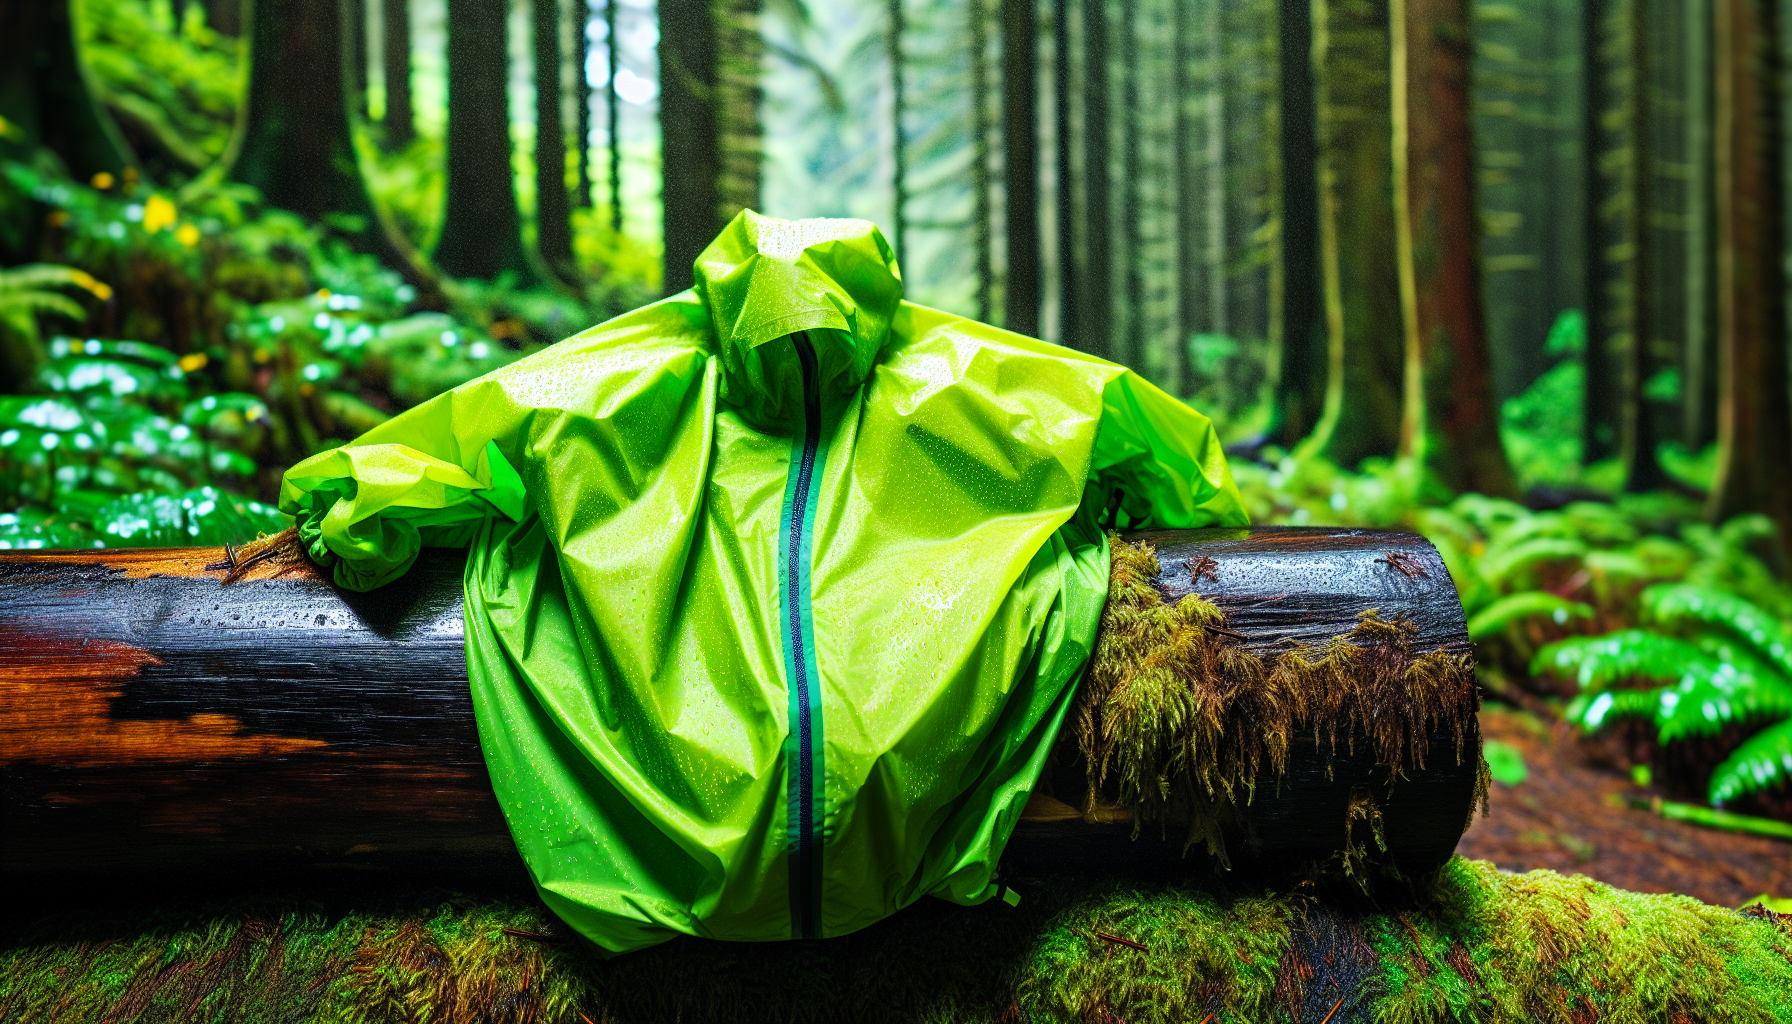 Top Picks: What Are the Must Have Gear Essentials for Ultralight Backpacking